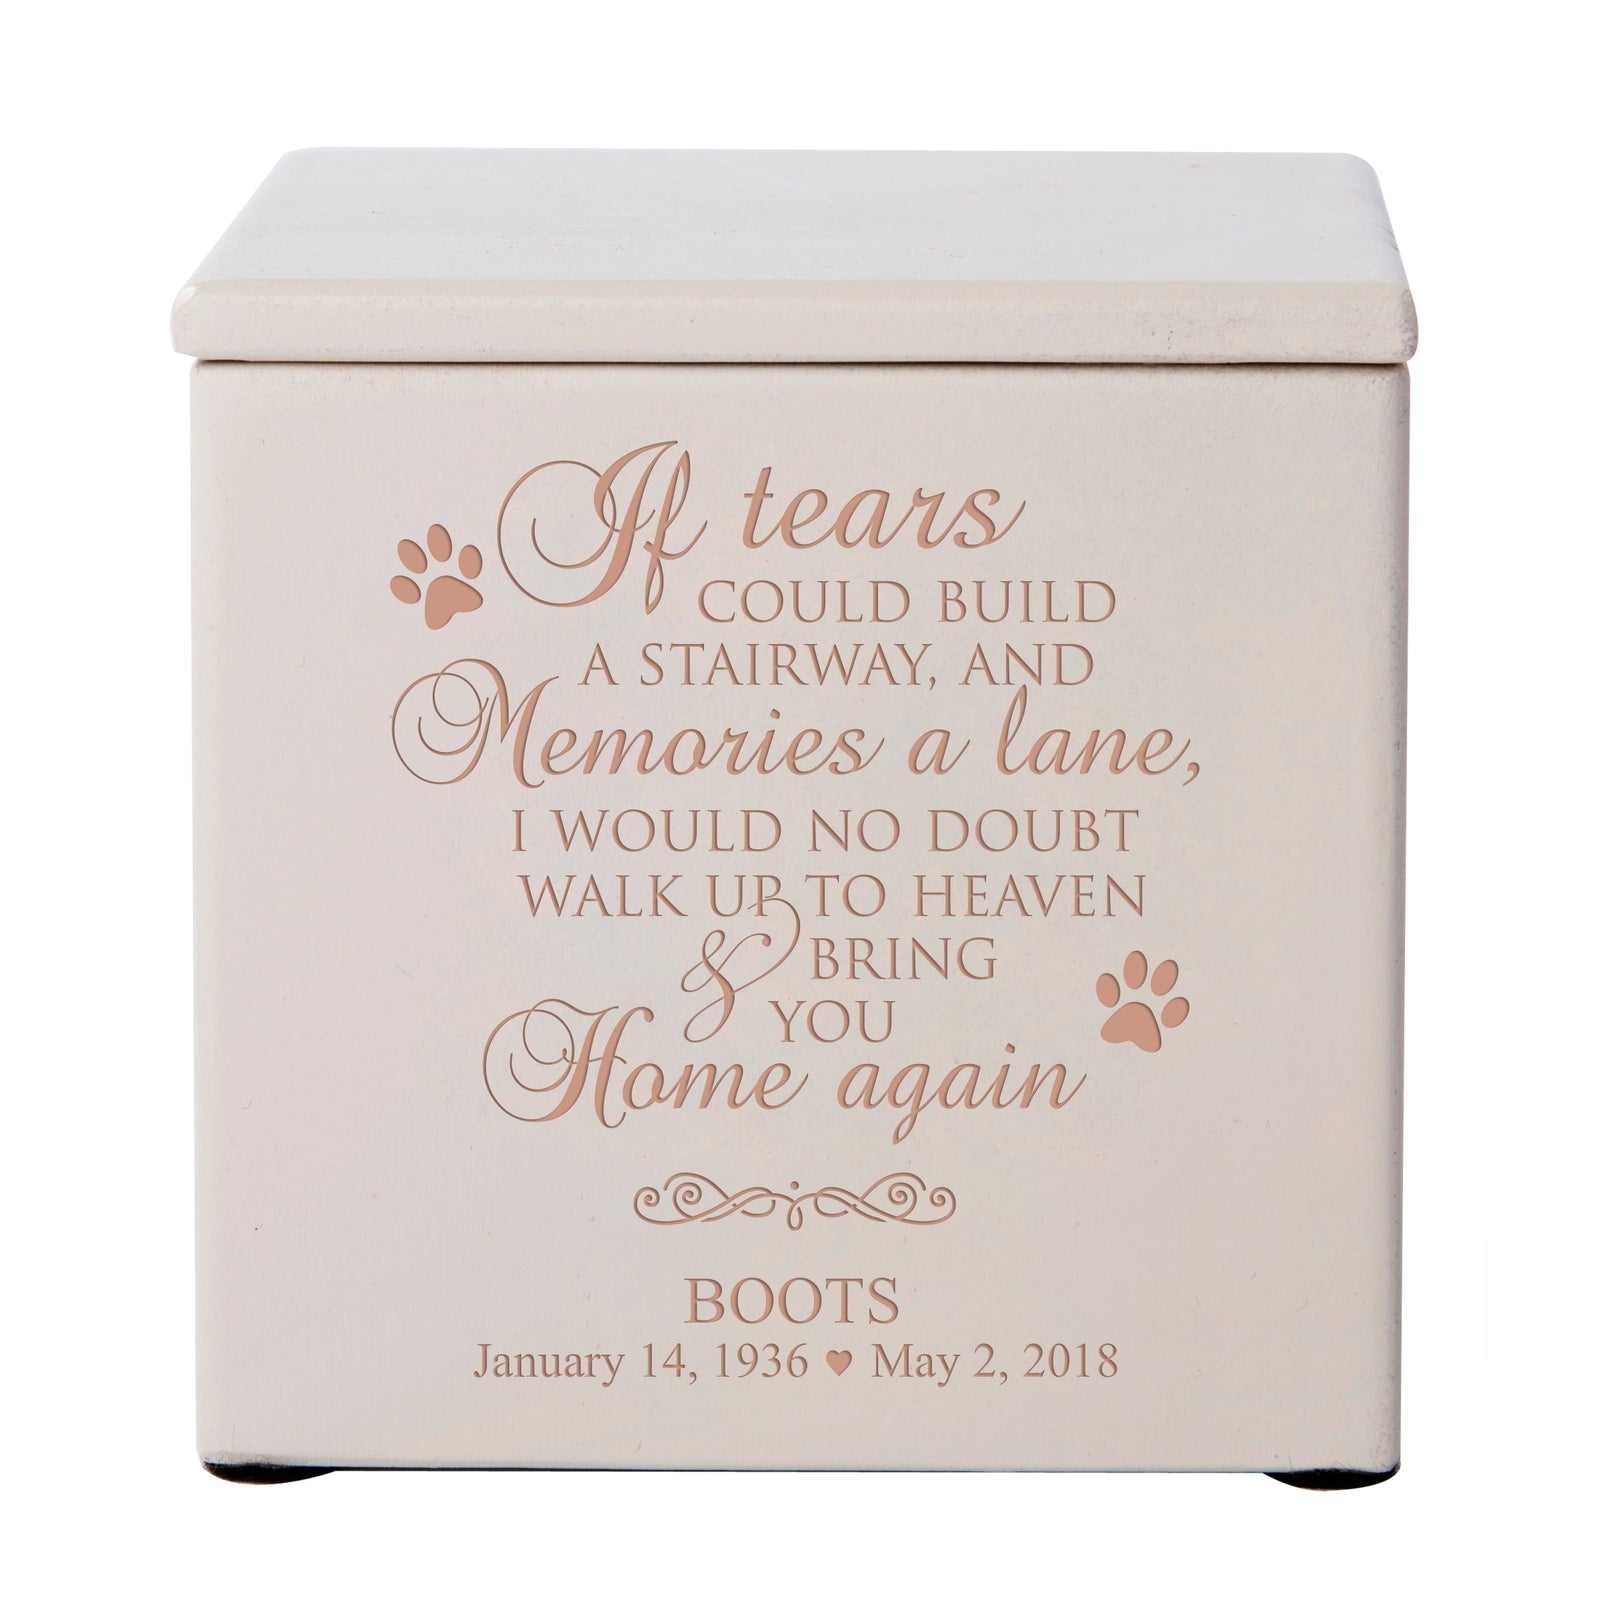 Pet Memorial Keepsake Cremation Urn Box for Dog or Cat - If Tears Could Build A Stairway